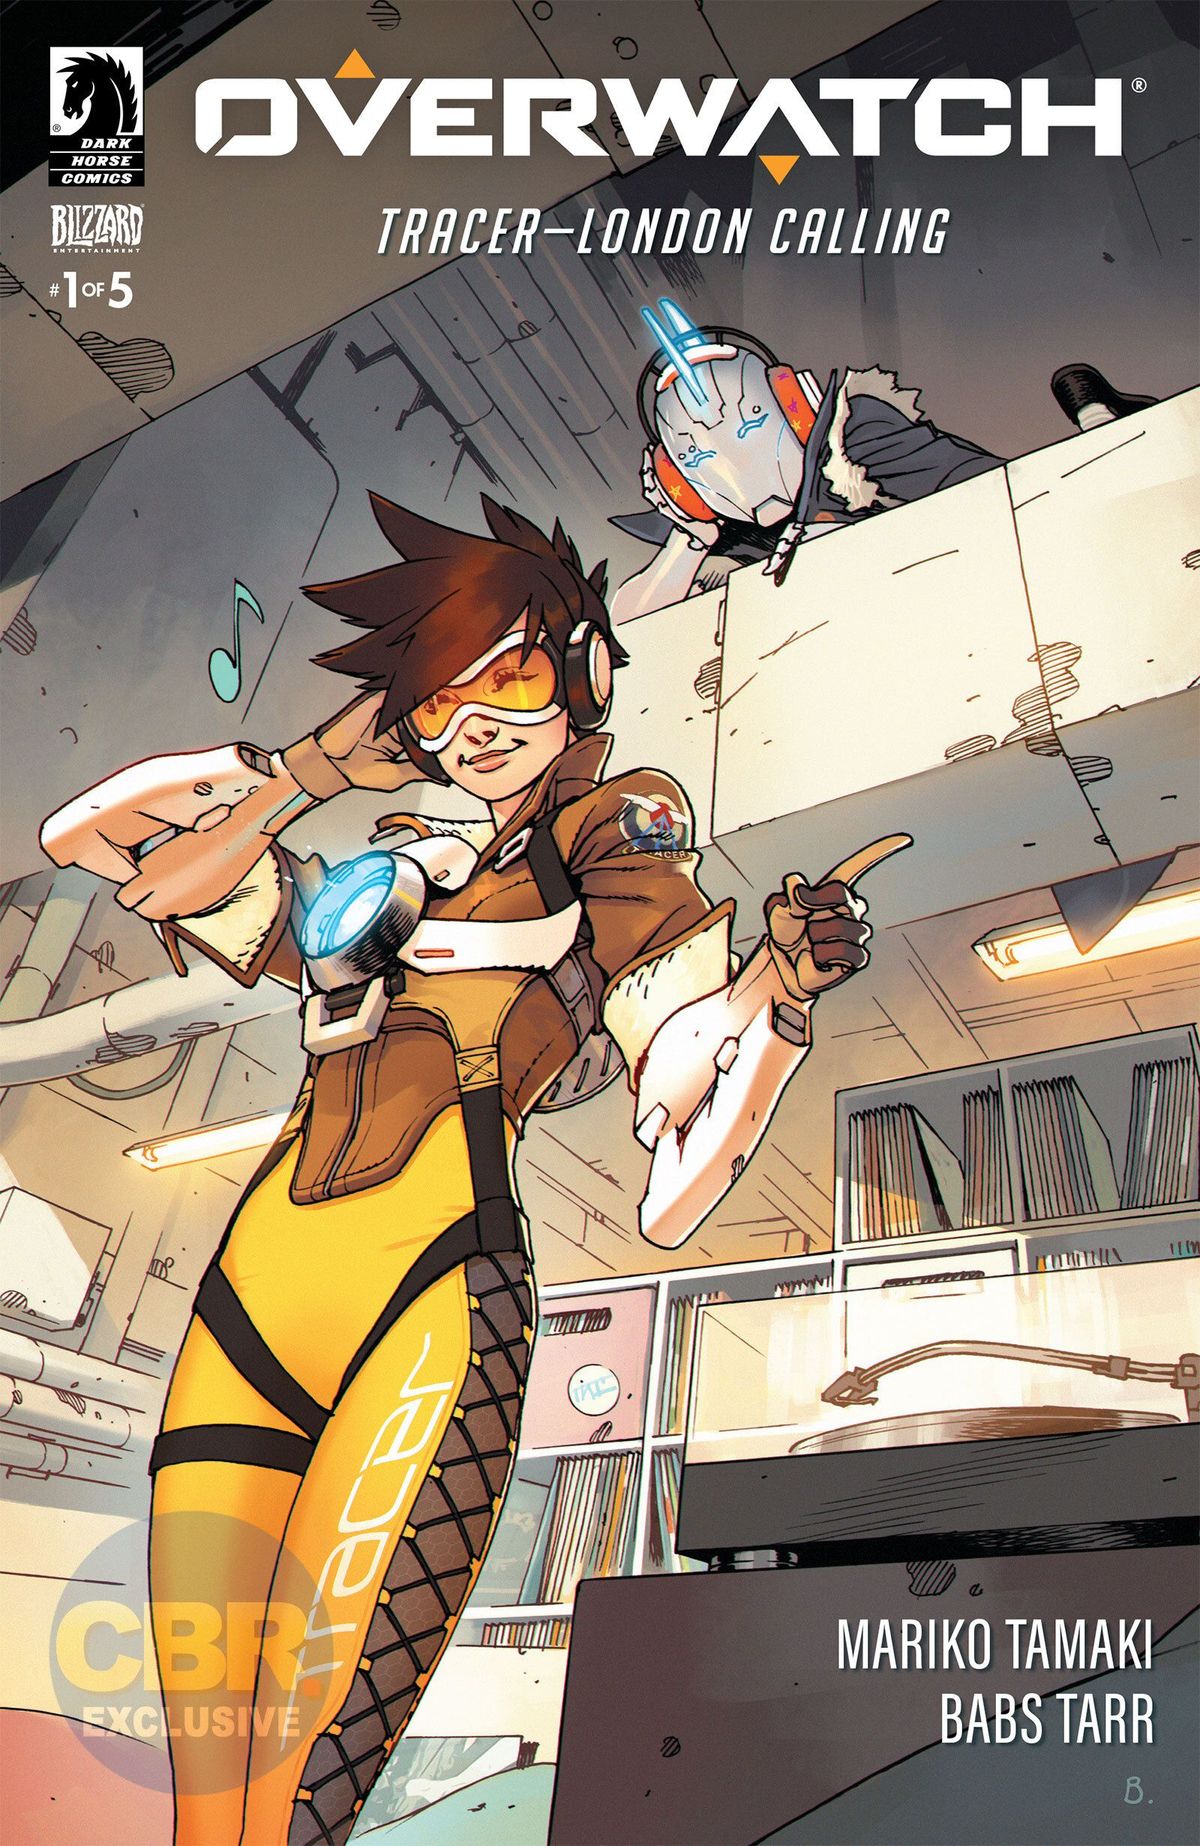 Overwatch: Tracer - London Calling # 1 First Look носи Blizzard Game на Dark Horse (Exclusive)